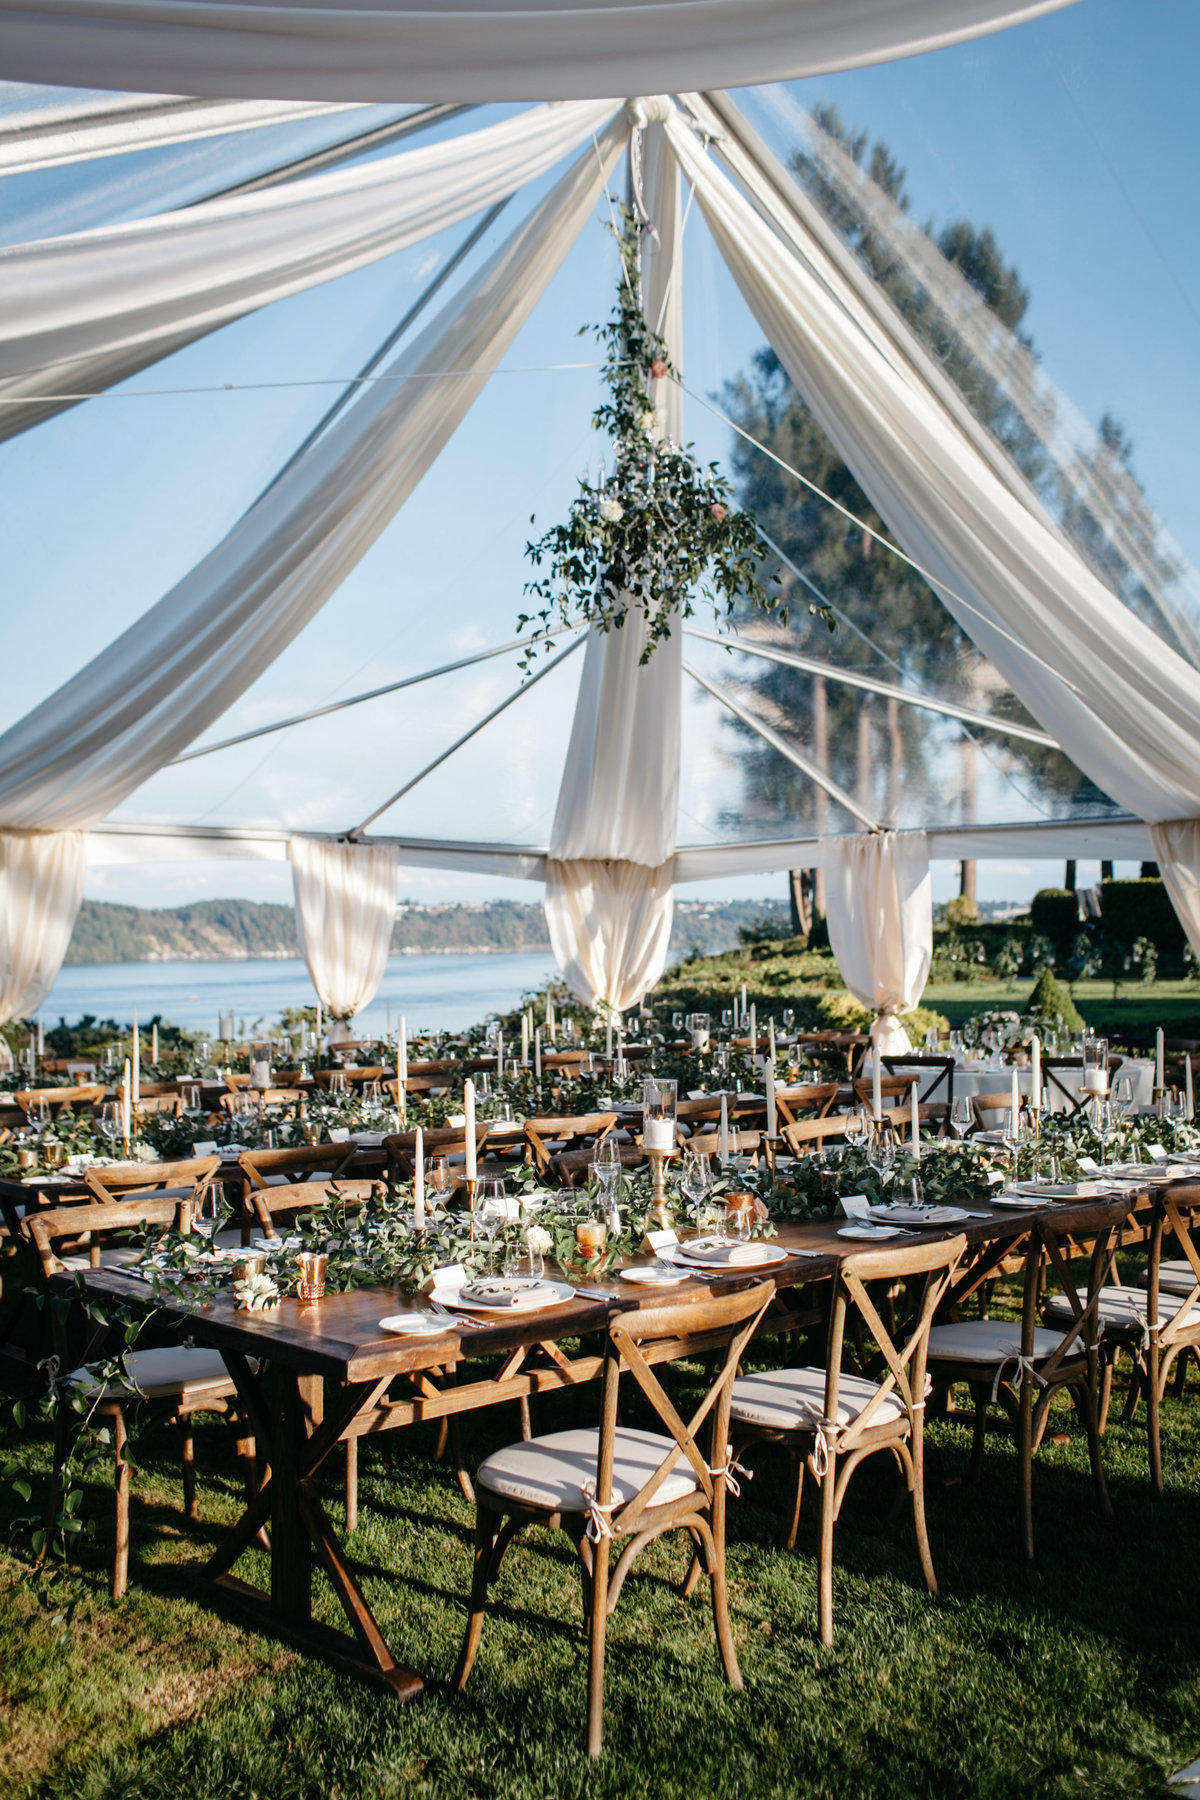 Tent wedding reception by the water with greenery covered chandeliers.